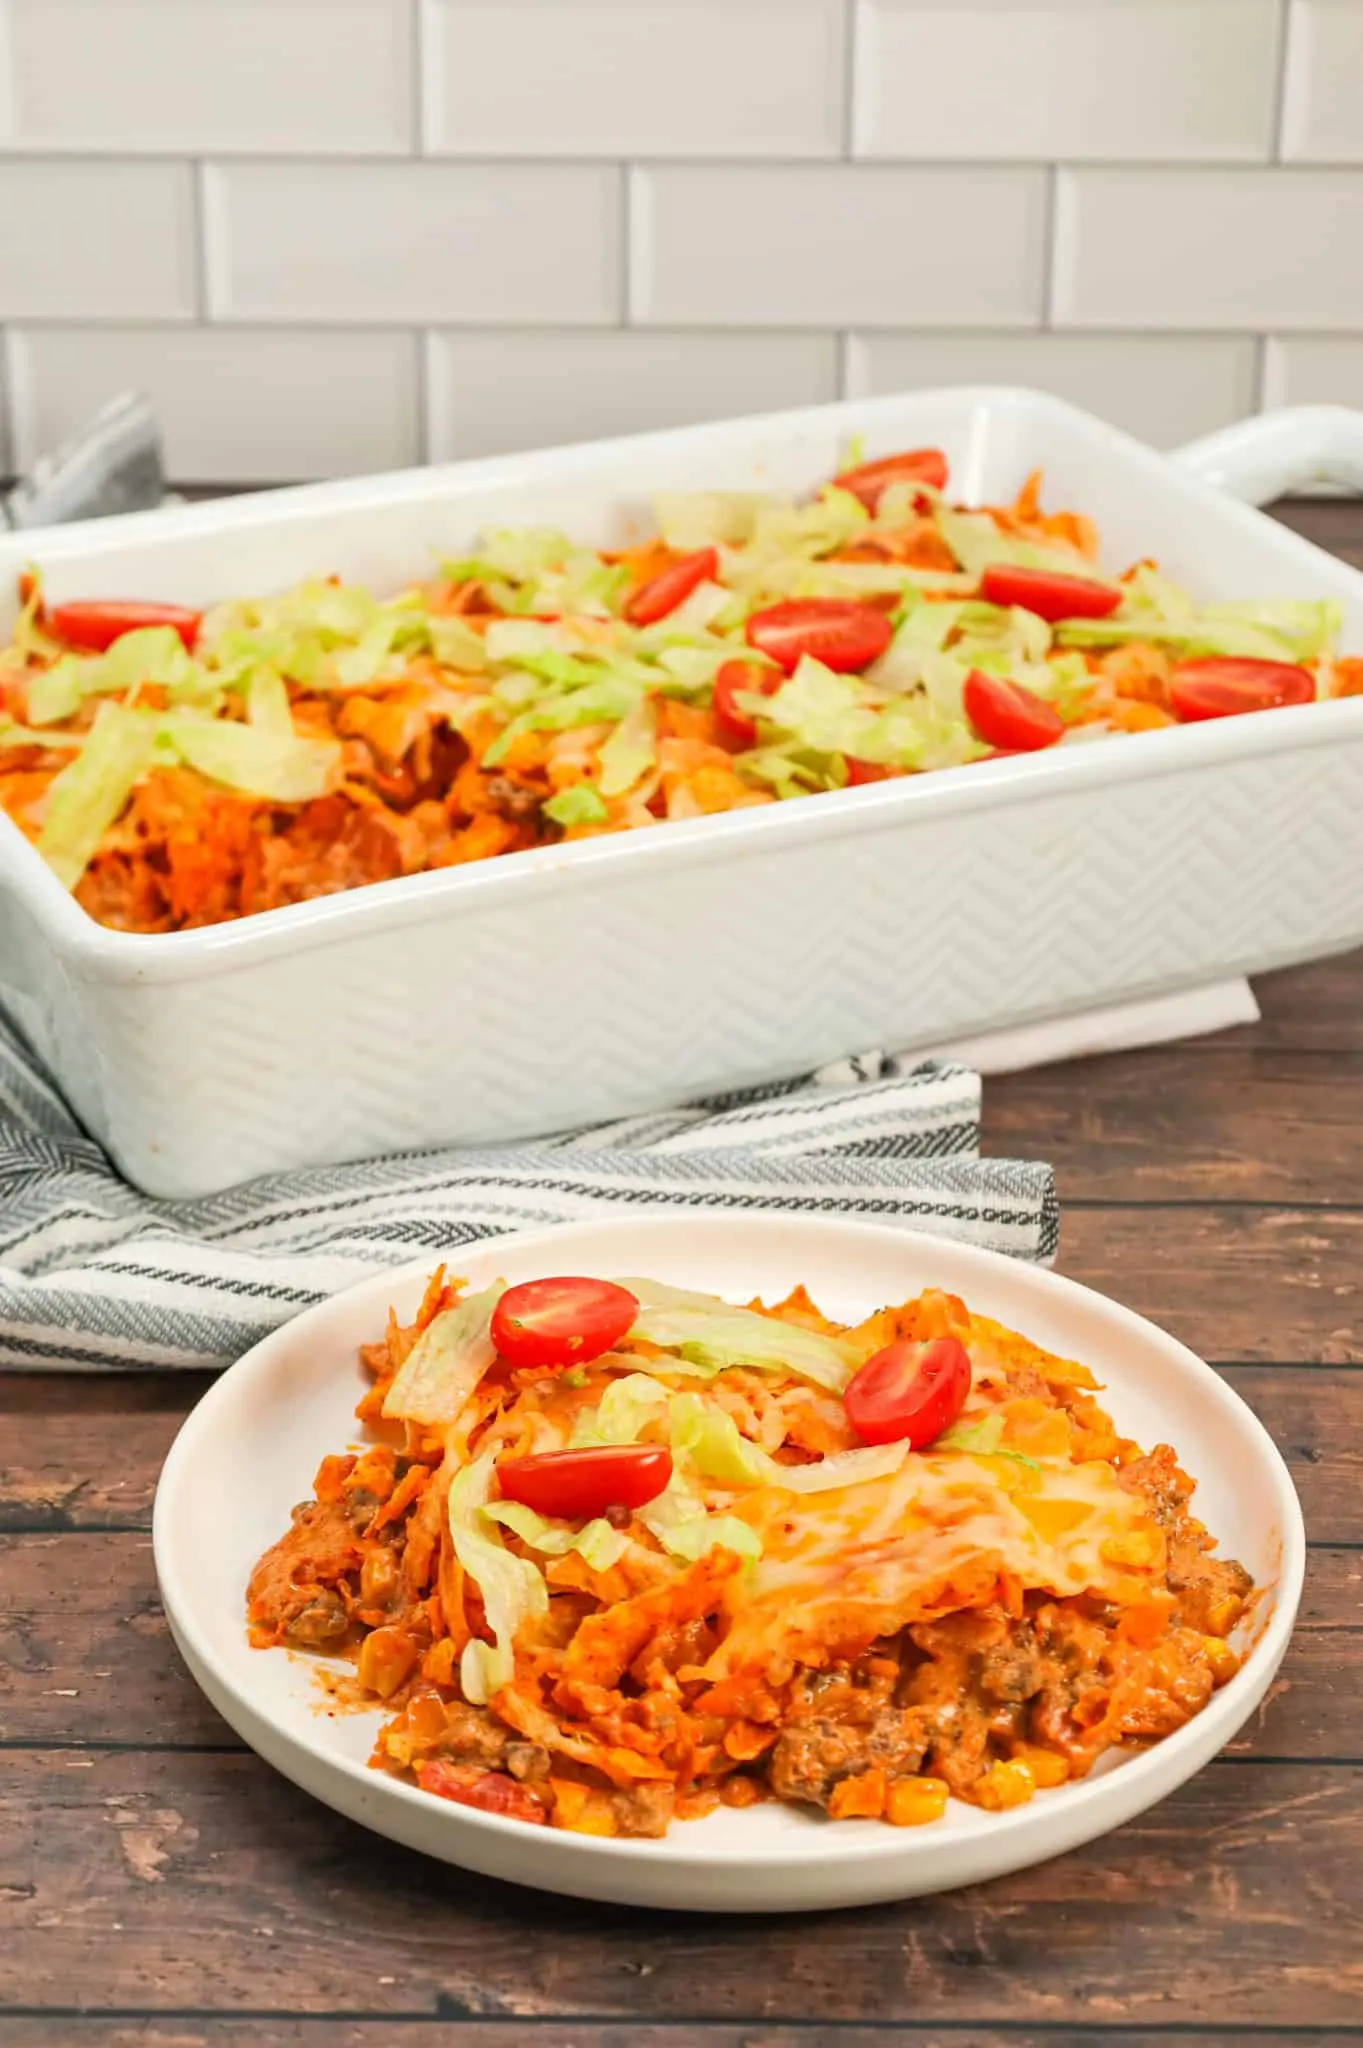 Taco Casserole with Doritos is an easy ground beef casserole recipe loaded with Rotel diced tomatoes and green chilies, salsa, cheddar cheese soup, corn, crumbled Doritos nacho chips and shredded cheese.